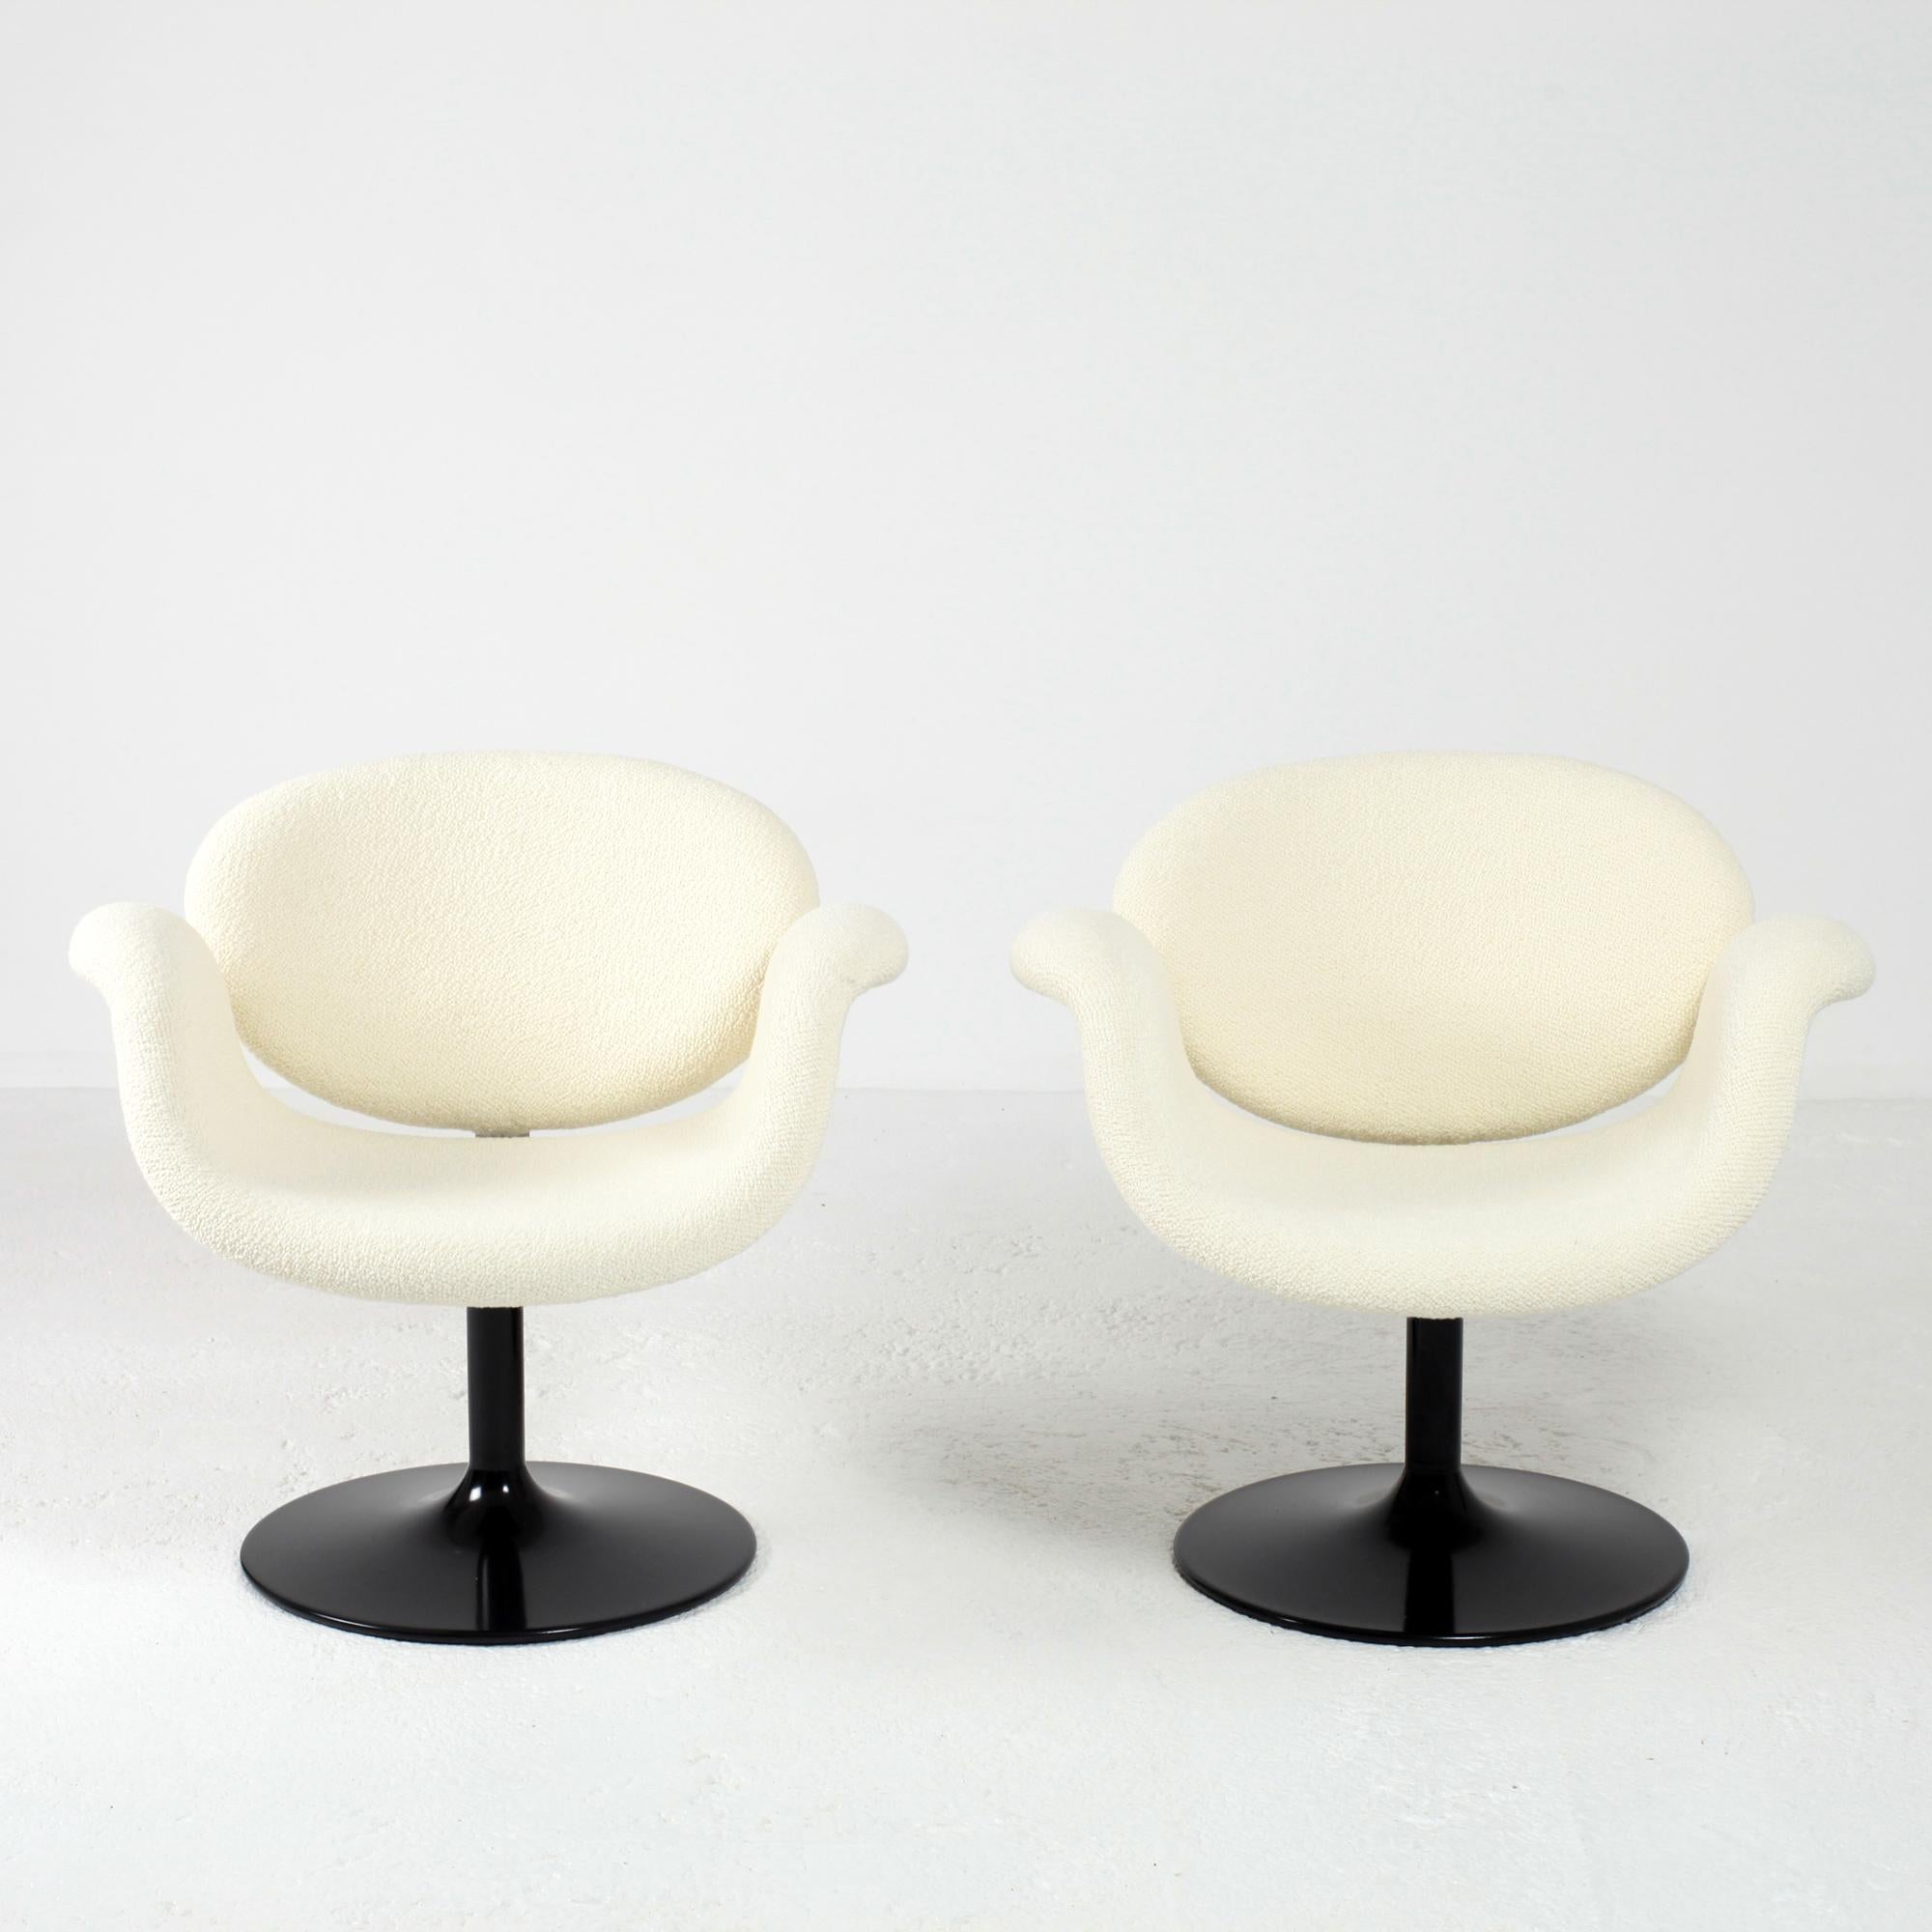 Metal Pierre Paulin Pair of Little Tulip Swivel Chairs First Edition, 1960s